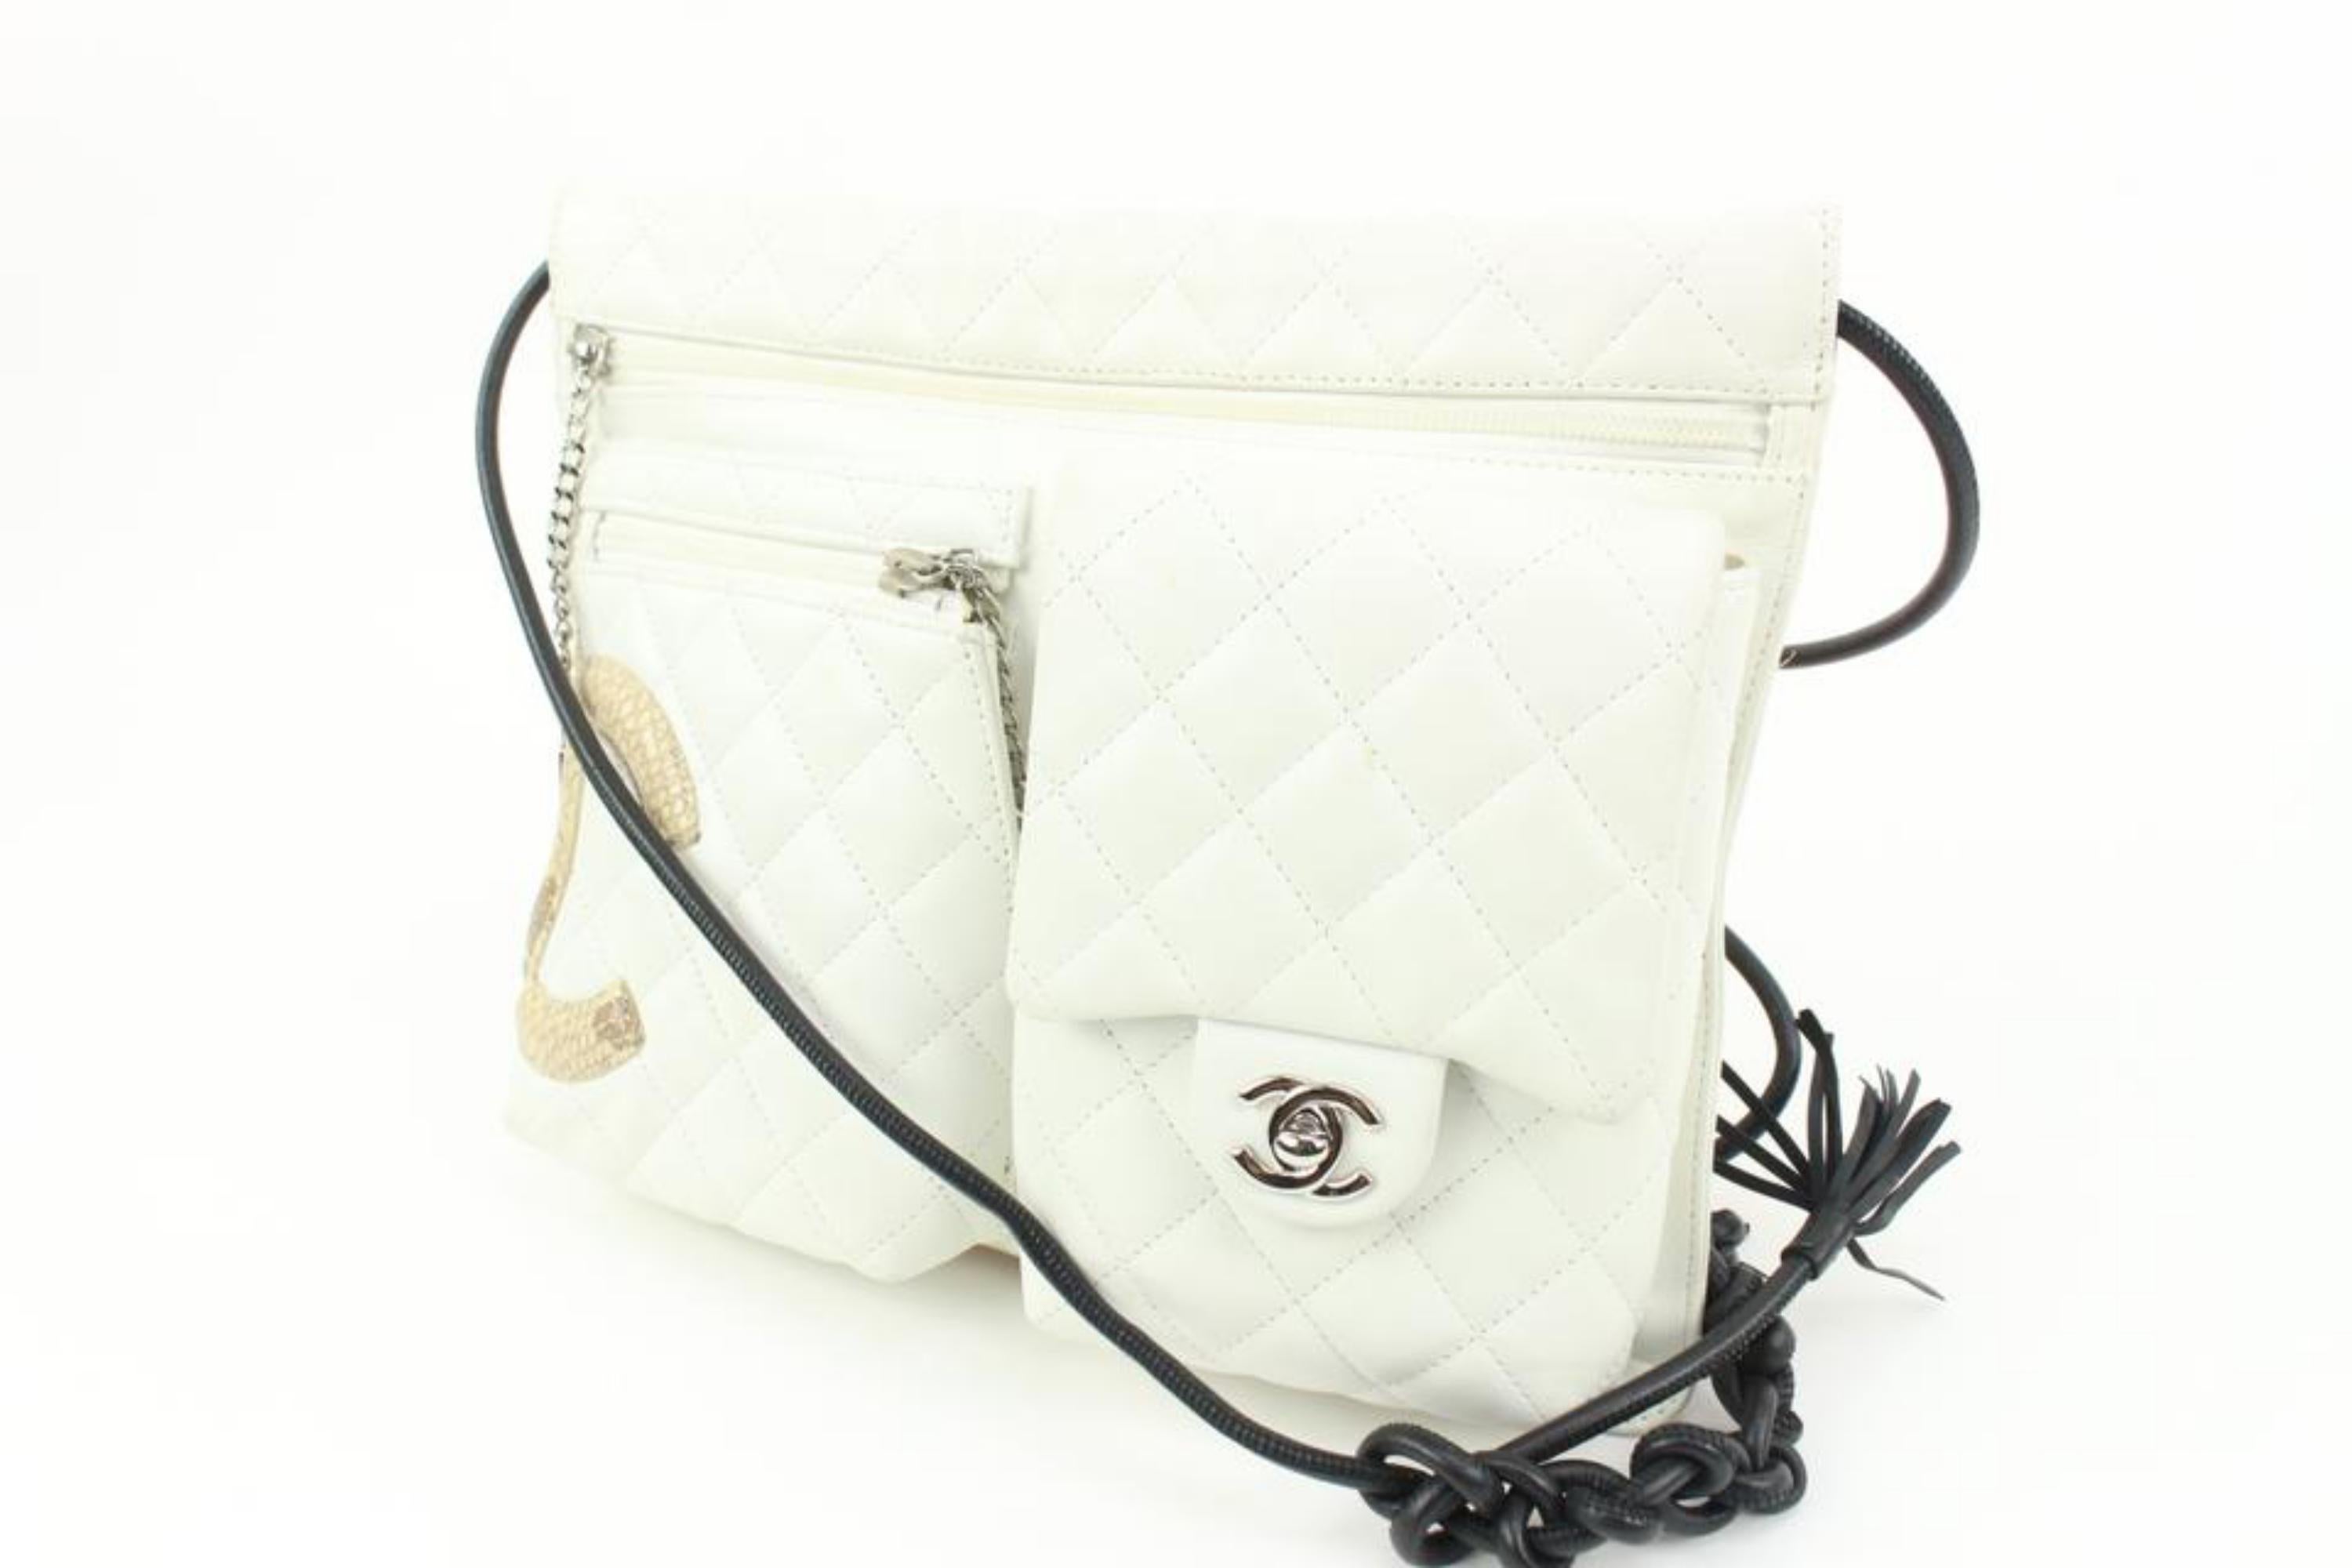 Chanel White Quilted Cambon Waist Pouch Fanny Pack 2way Crossbody 7ck310s
Date Code/Serial Number: 9850607
Made In: France
Measurements: Length:  11